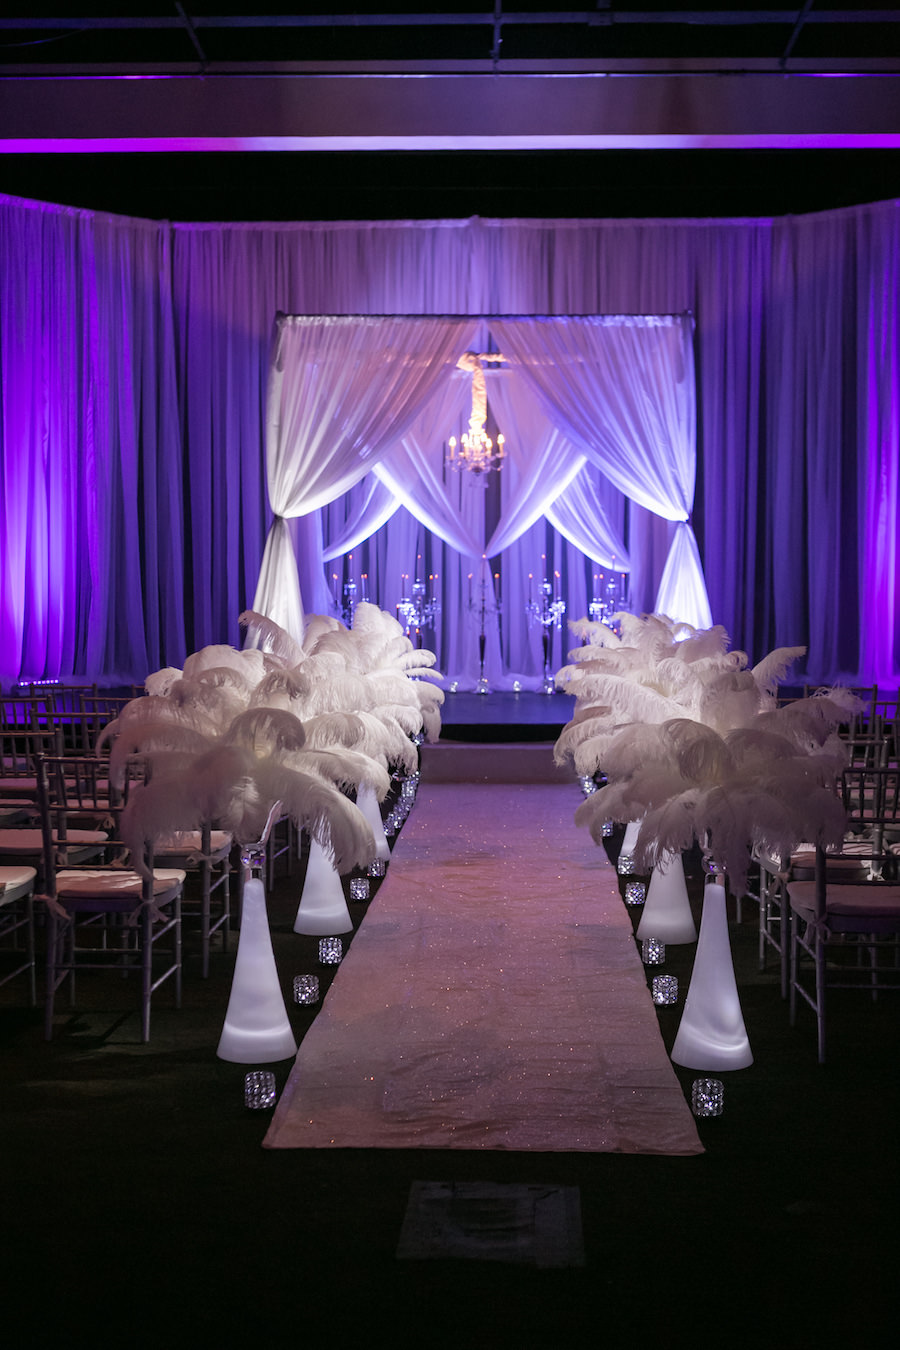 Purple Uplighting and Pin-spotting Lighting Effects for Florida Modern Wedding Ceremony with Drapery and Chiavari Chairs with Feather Aisle Decor by Tampa Event Rental Company Gabro Event Services